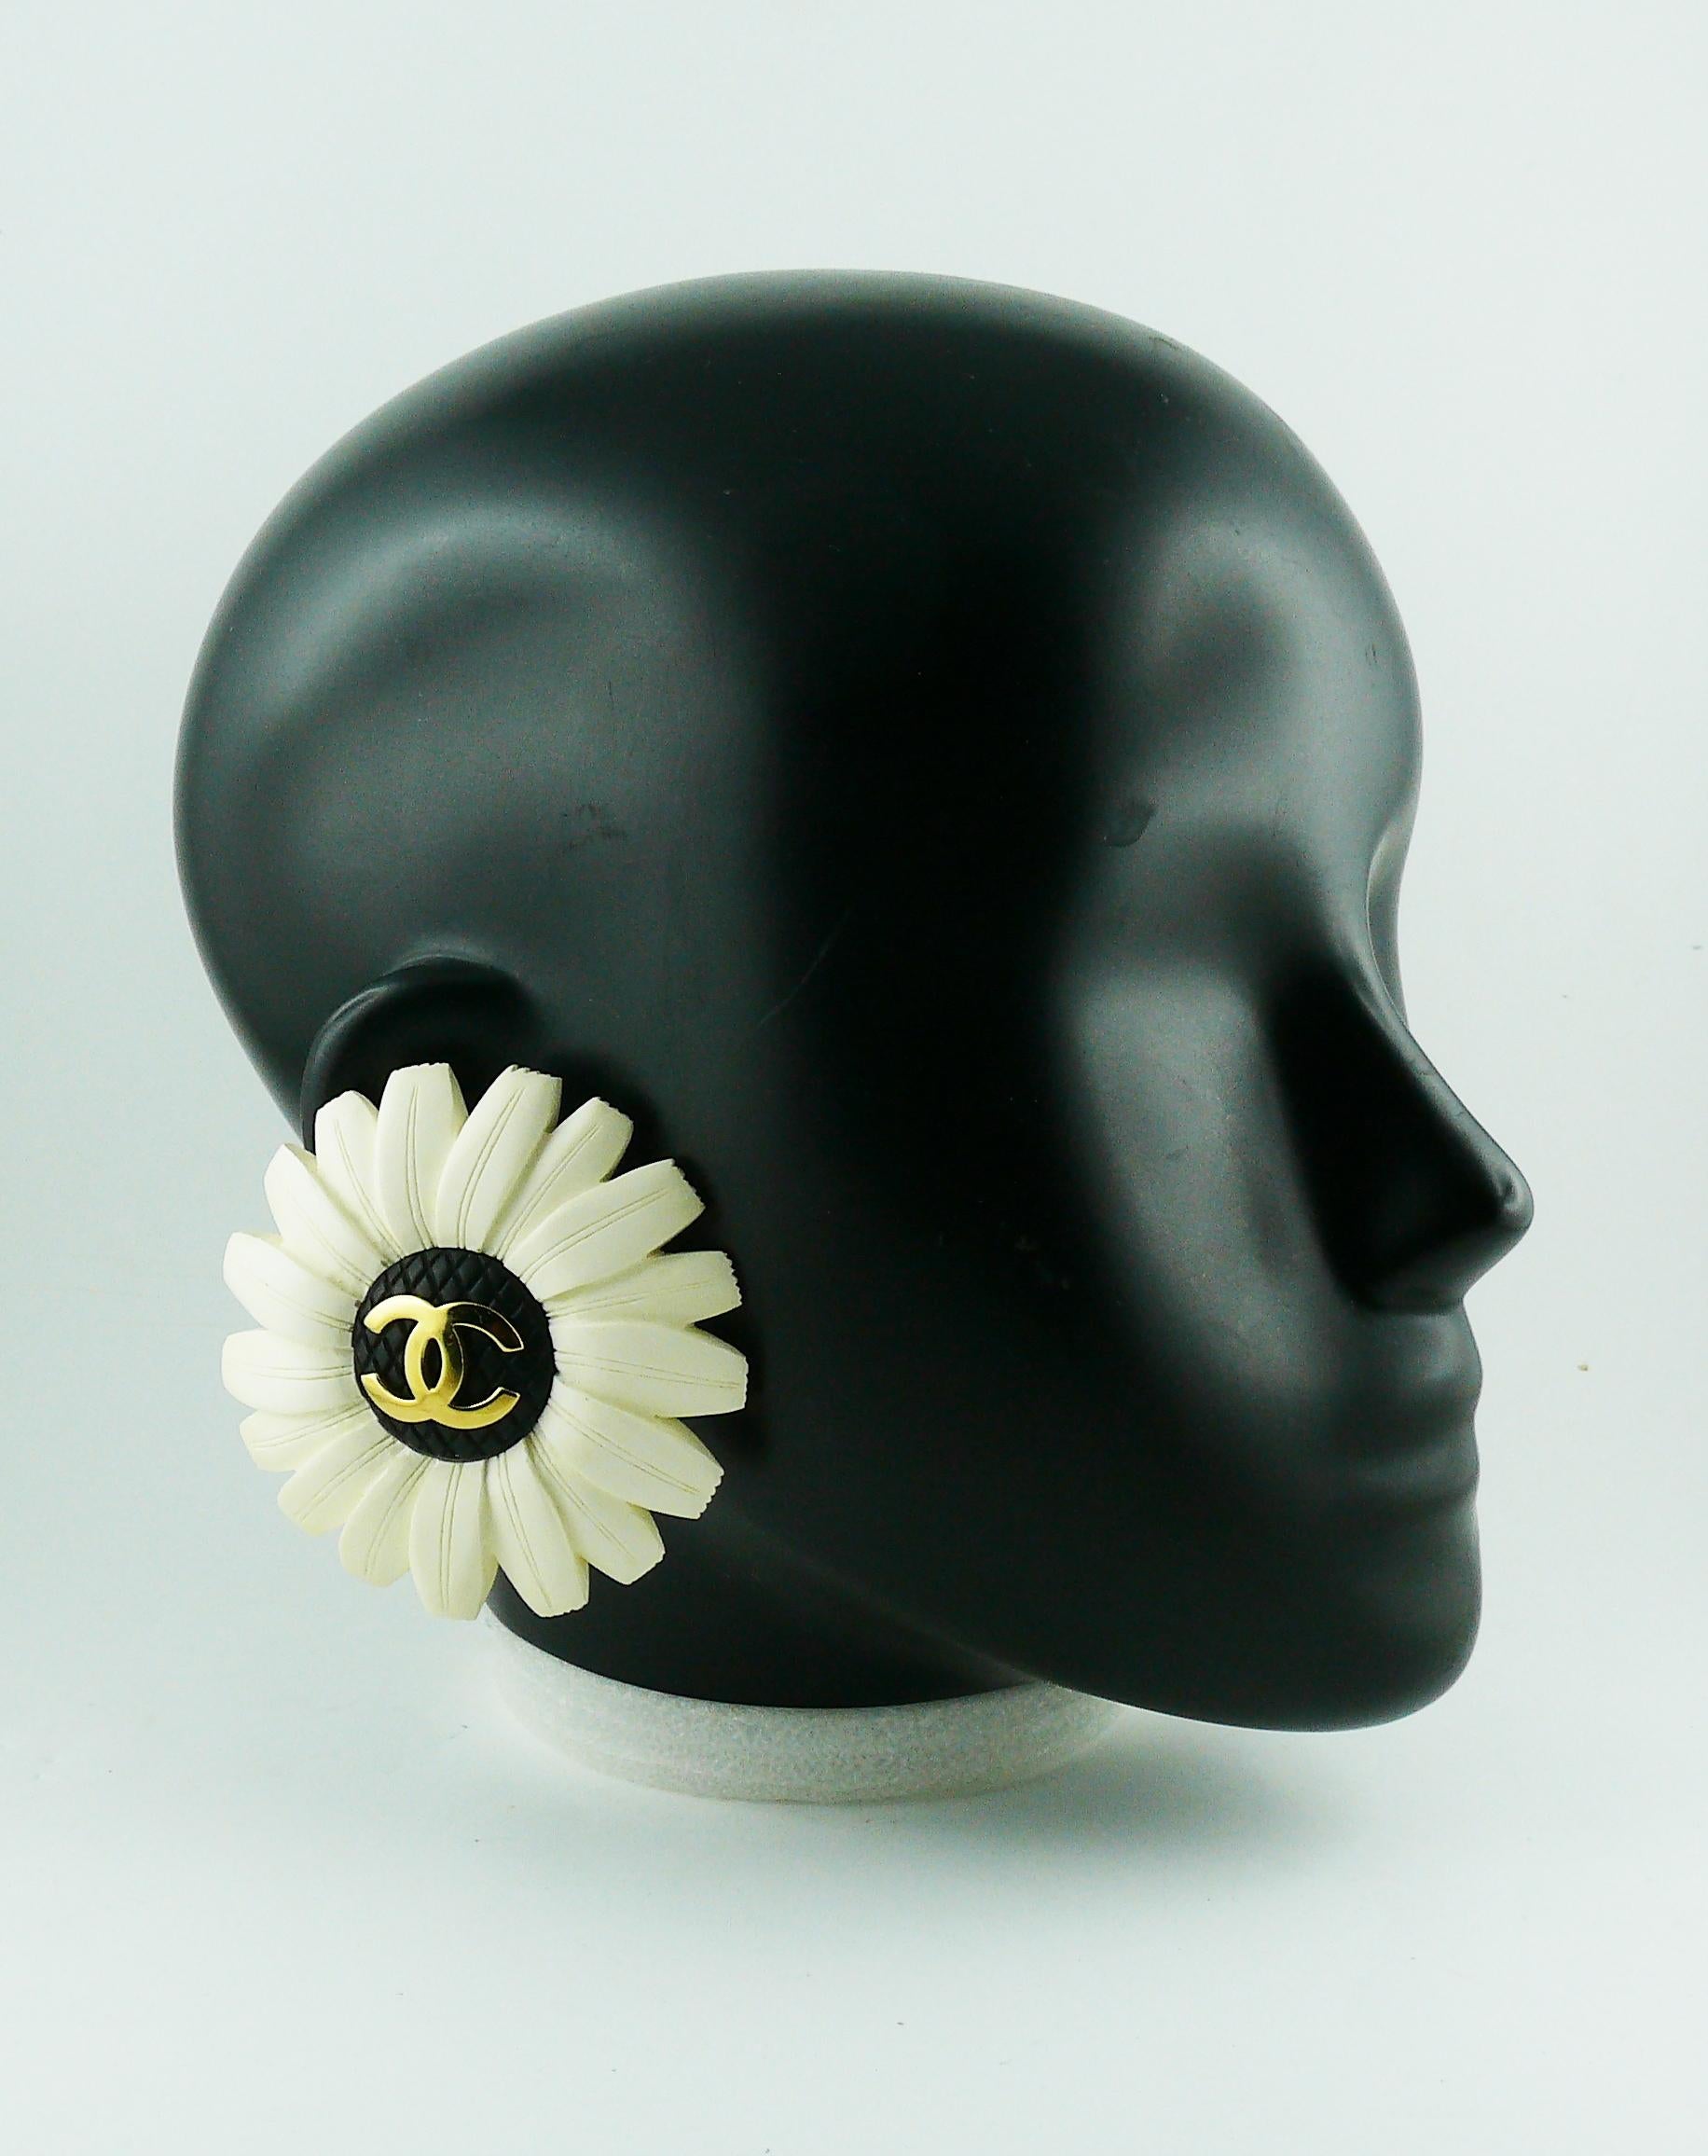 CHANEL vintage rare oversized white resin flower clip-on earrings featuring a gold toned CC monogram at center.

Embossed CHANEL.

Indicative measurements : diameter approx. 7 cm (2.76 inches).

JEWELRY CONDITION CHART
- New or never worn : item is